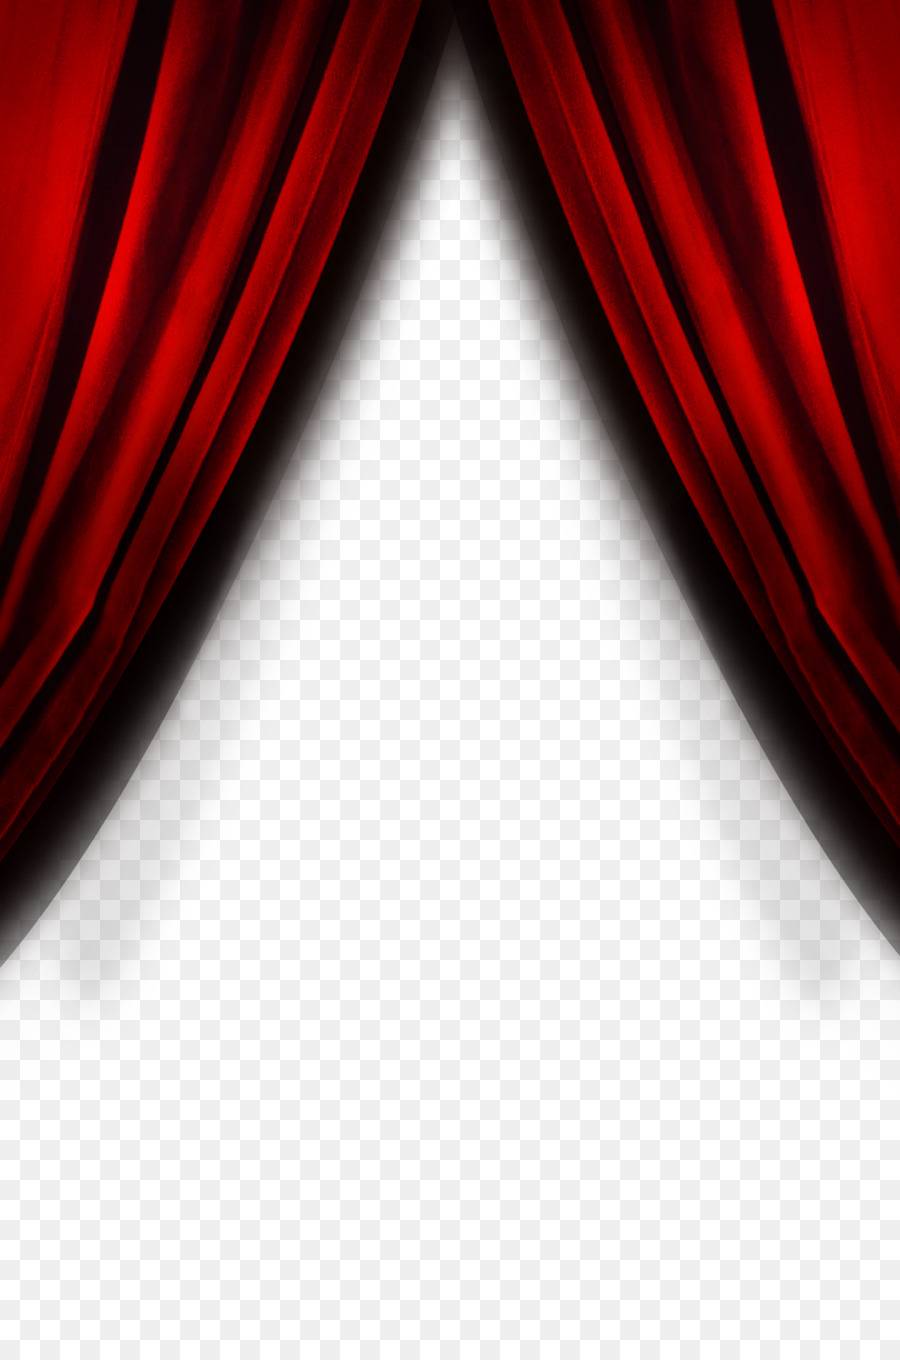 Theater drapes and stage curtains Close-up Computer Theatre Wallpaper - Red, red ribbon, Taobao material png download - 1461*2181 - Free Transparent Theater Drapes And Stage Curtains png Download.